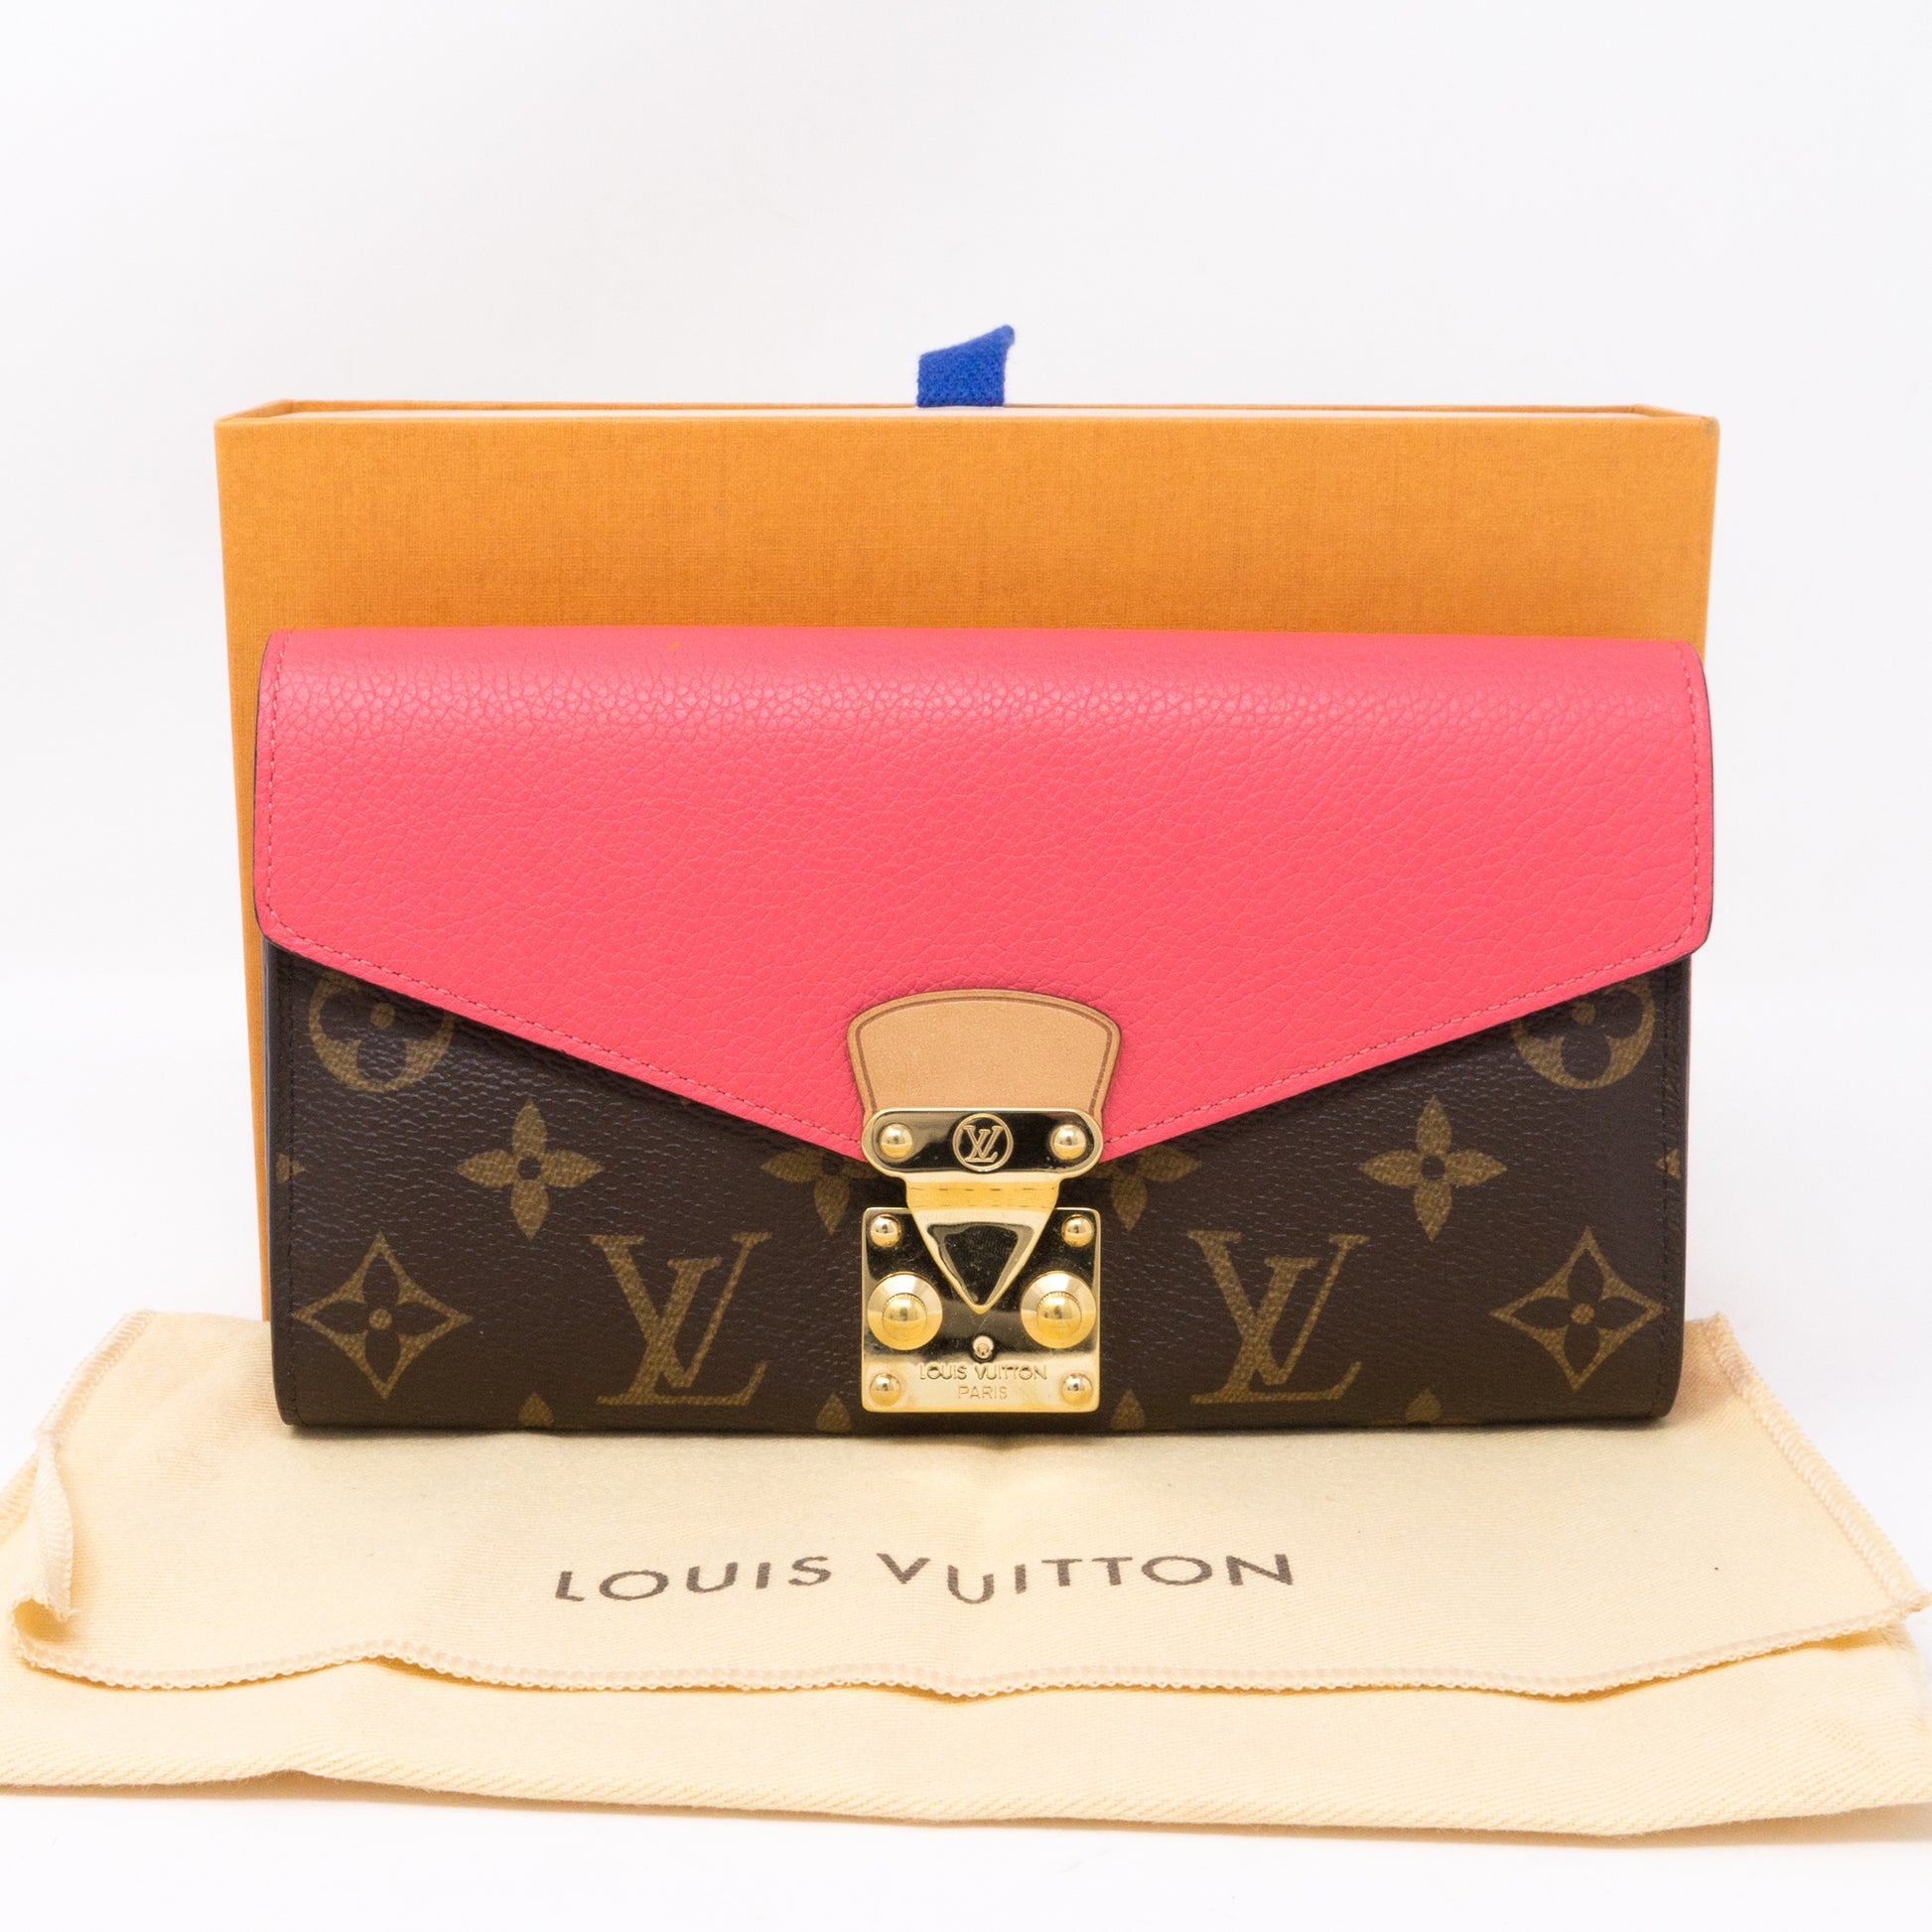 Louis Vuitton - Authenticated Pallas Wallet - Leather Brown for Women, Good Condition